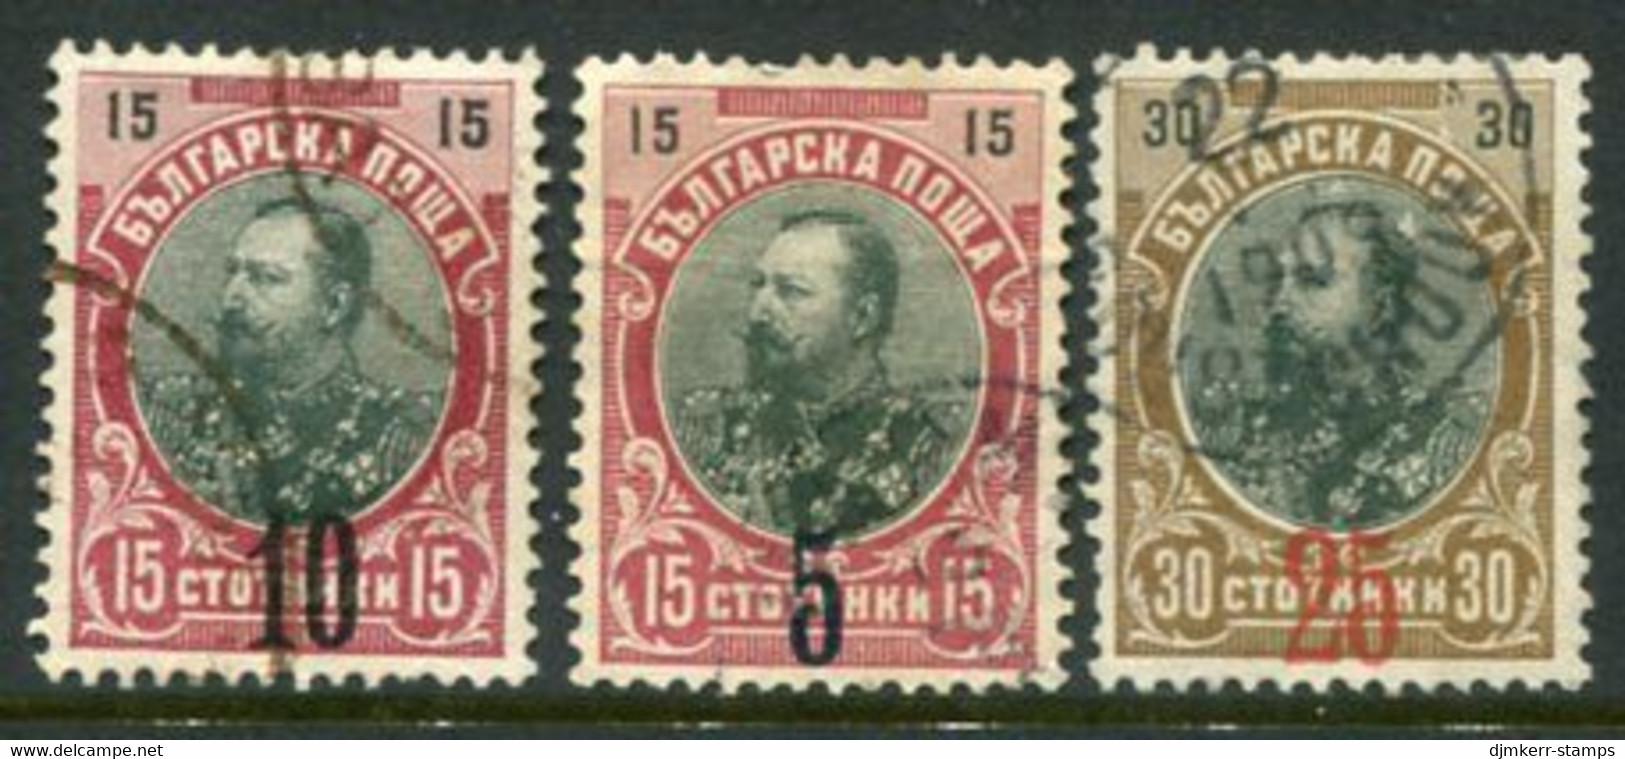 BULGARIA 1903-09  Surcharges 10 On 15 St. 5 On 15 St. And 25 On 30 St. Used.  Michel 65, 69-70 - Usados